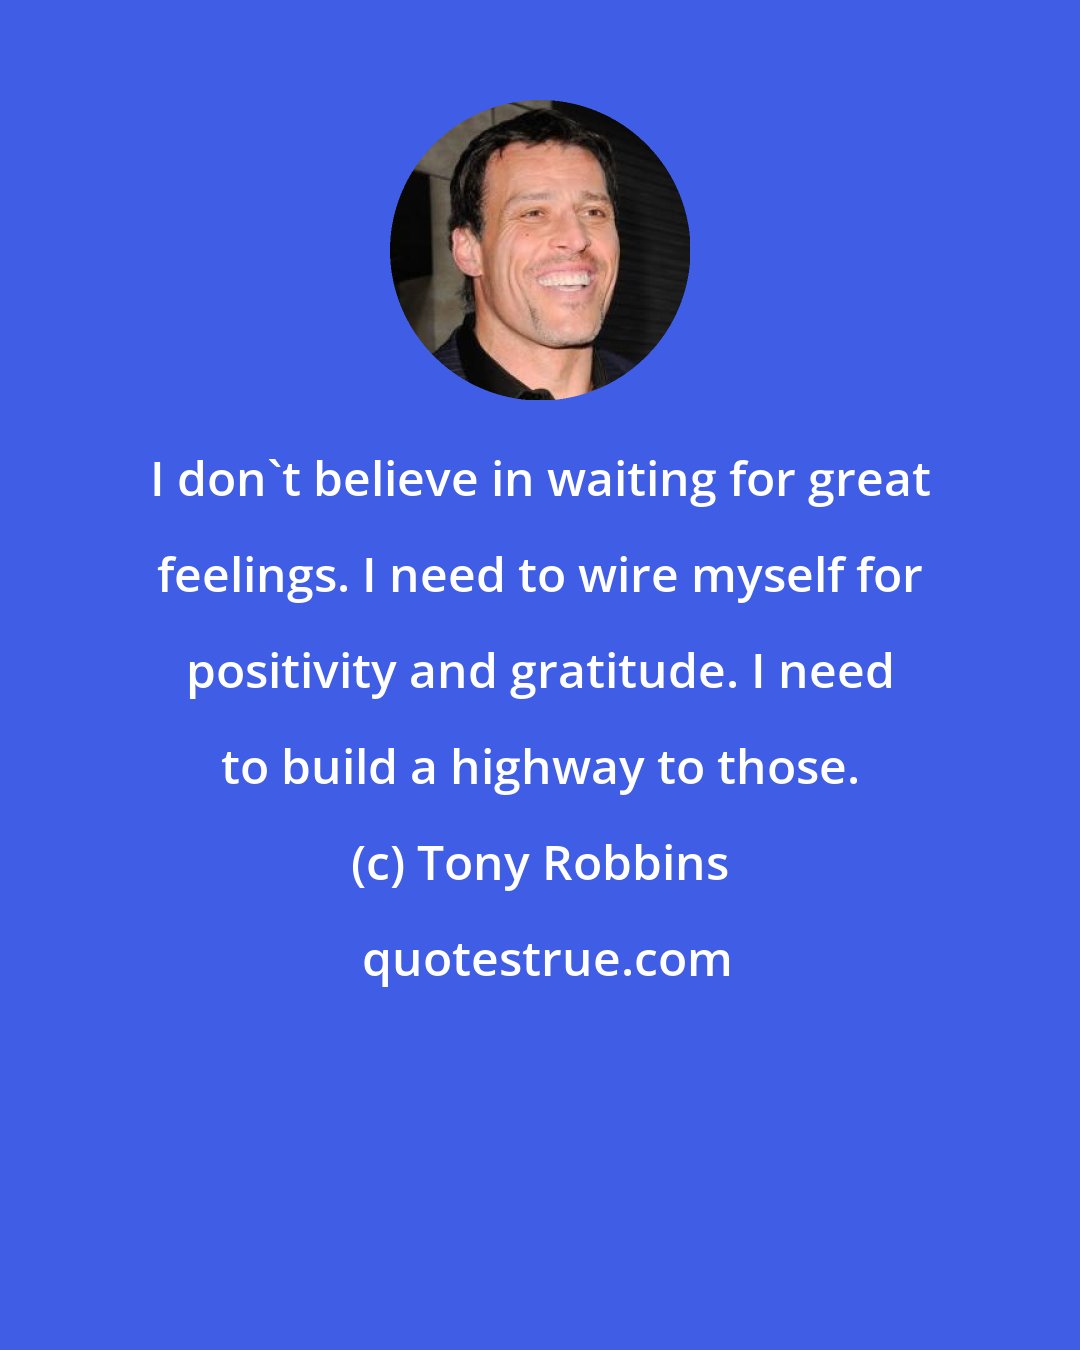 Tony Robbins: I don't believe in waiting for great feelings. I need to wire myself for positivity and gratitude. I need to build a highway to those.